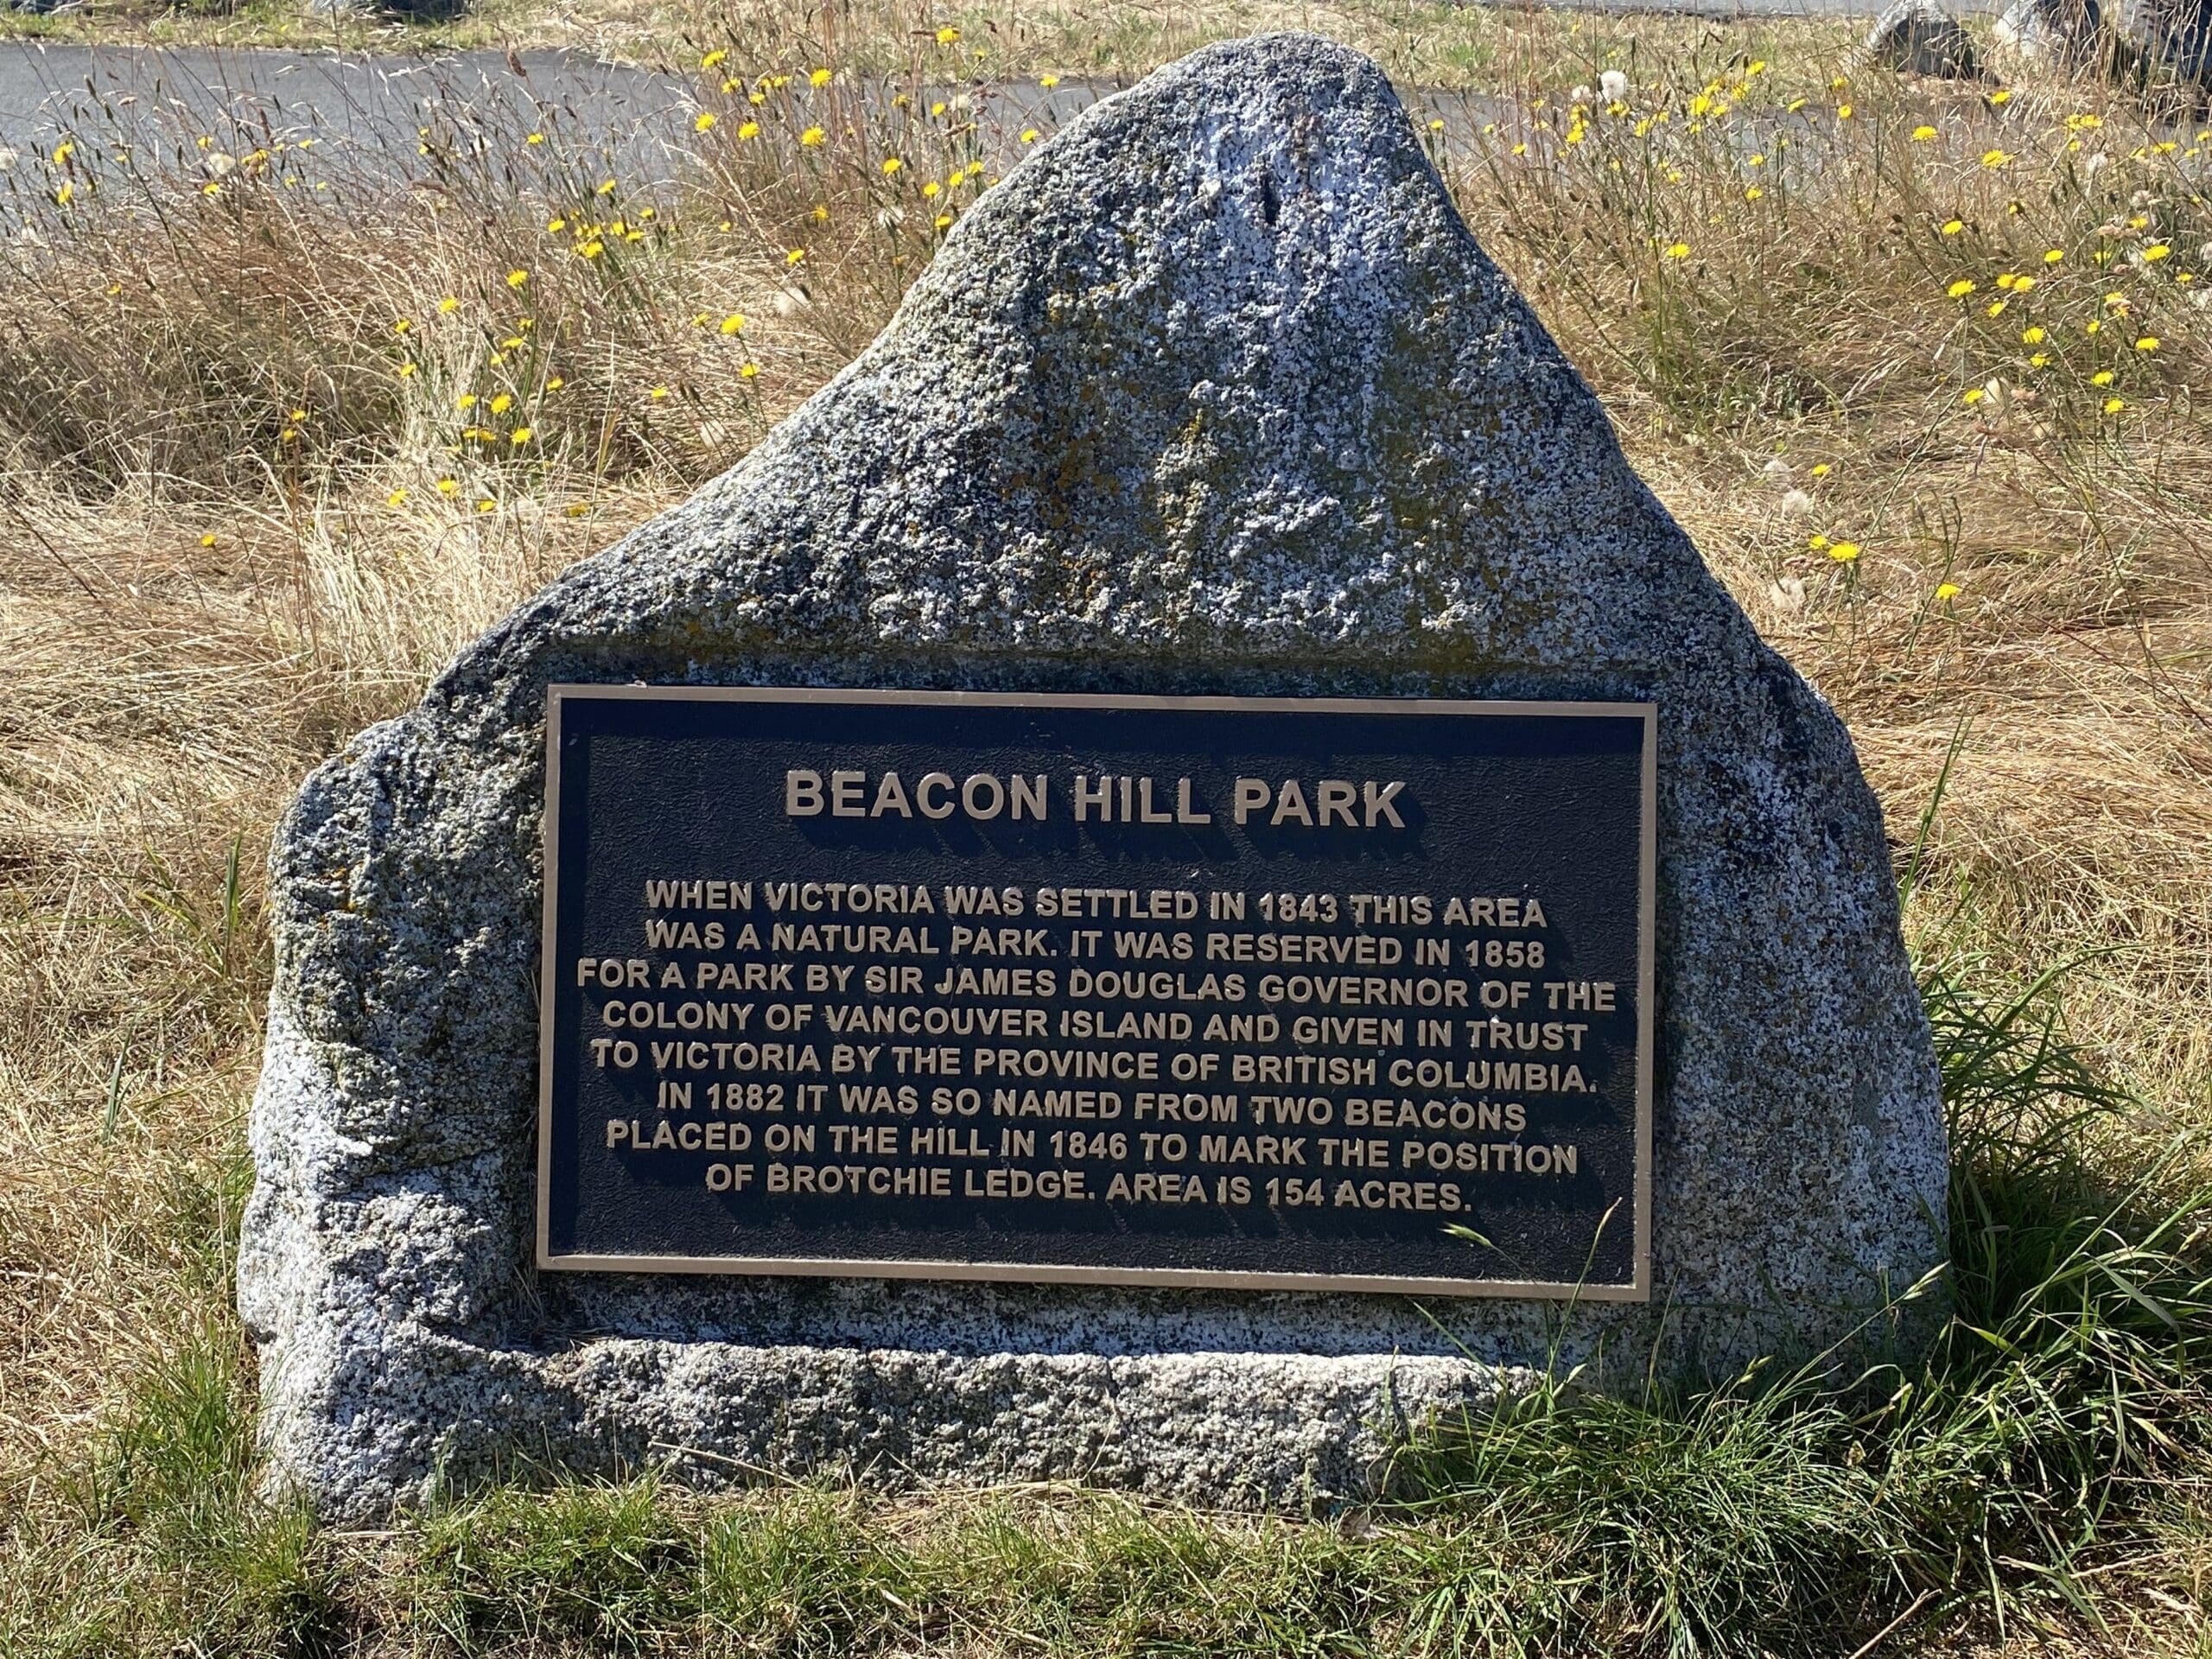 Beacon Hill Park monument showing history of the park, atop Beacon Hill